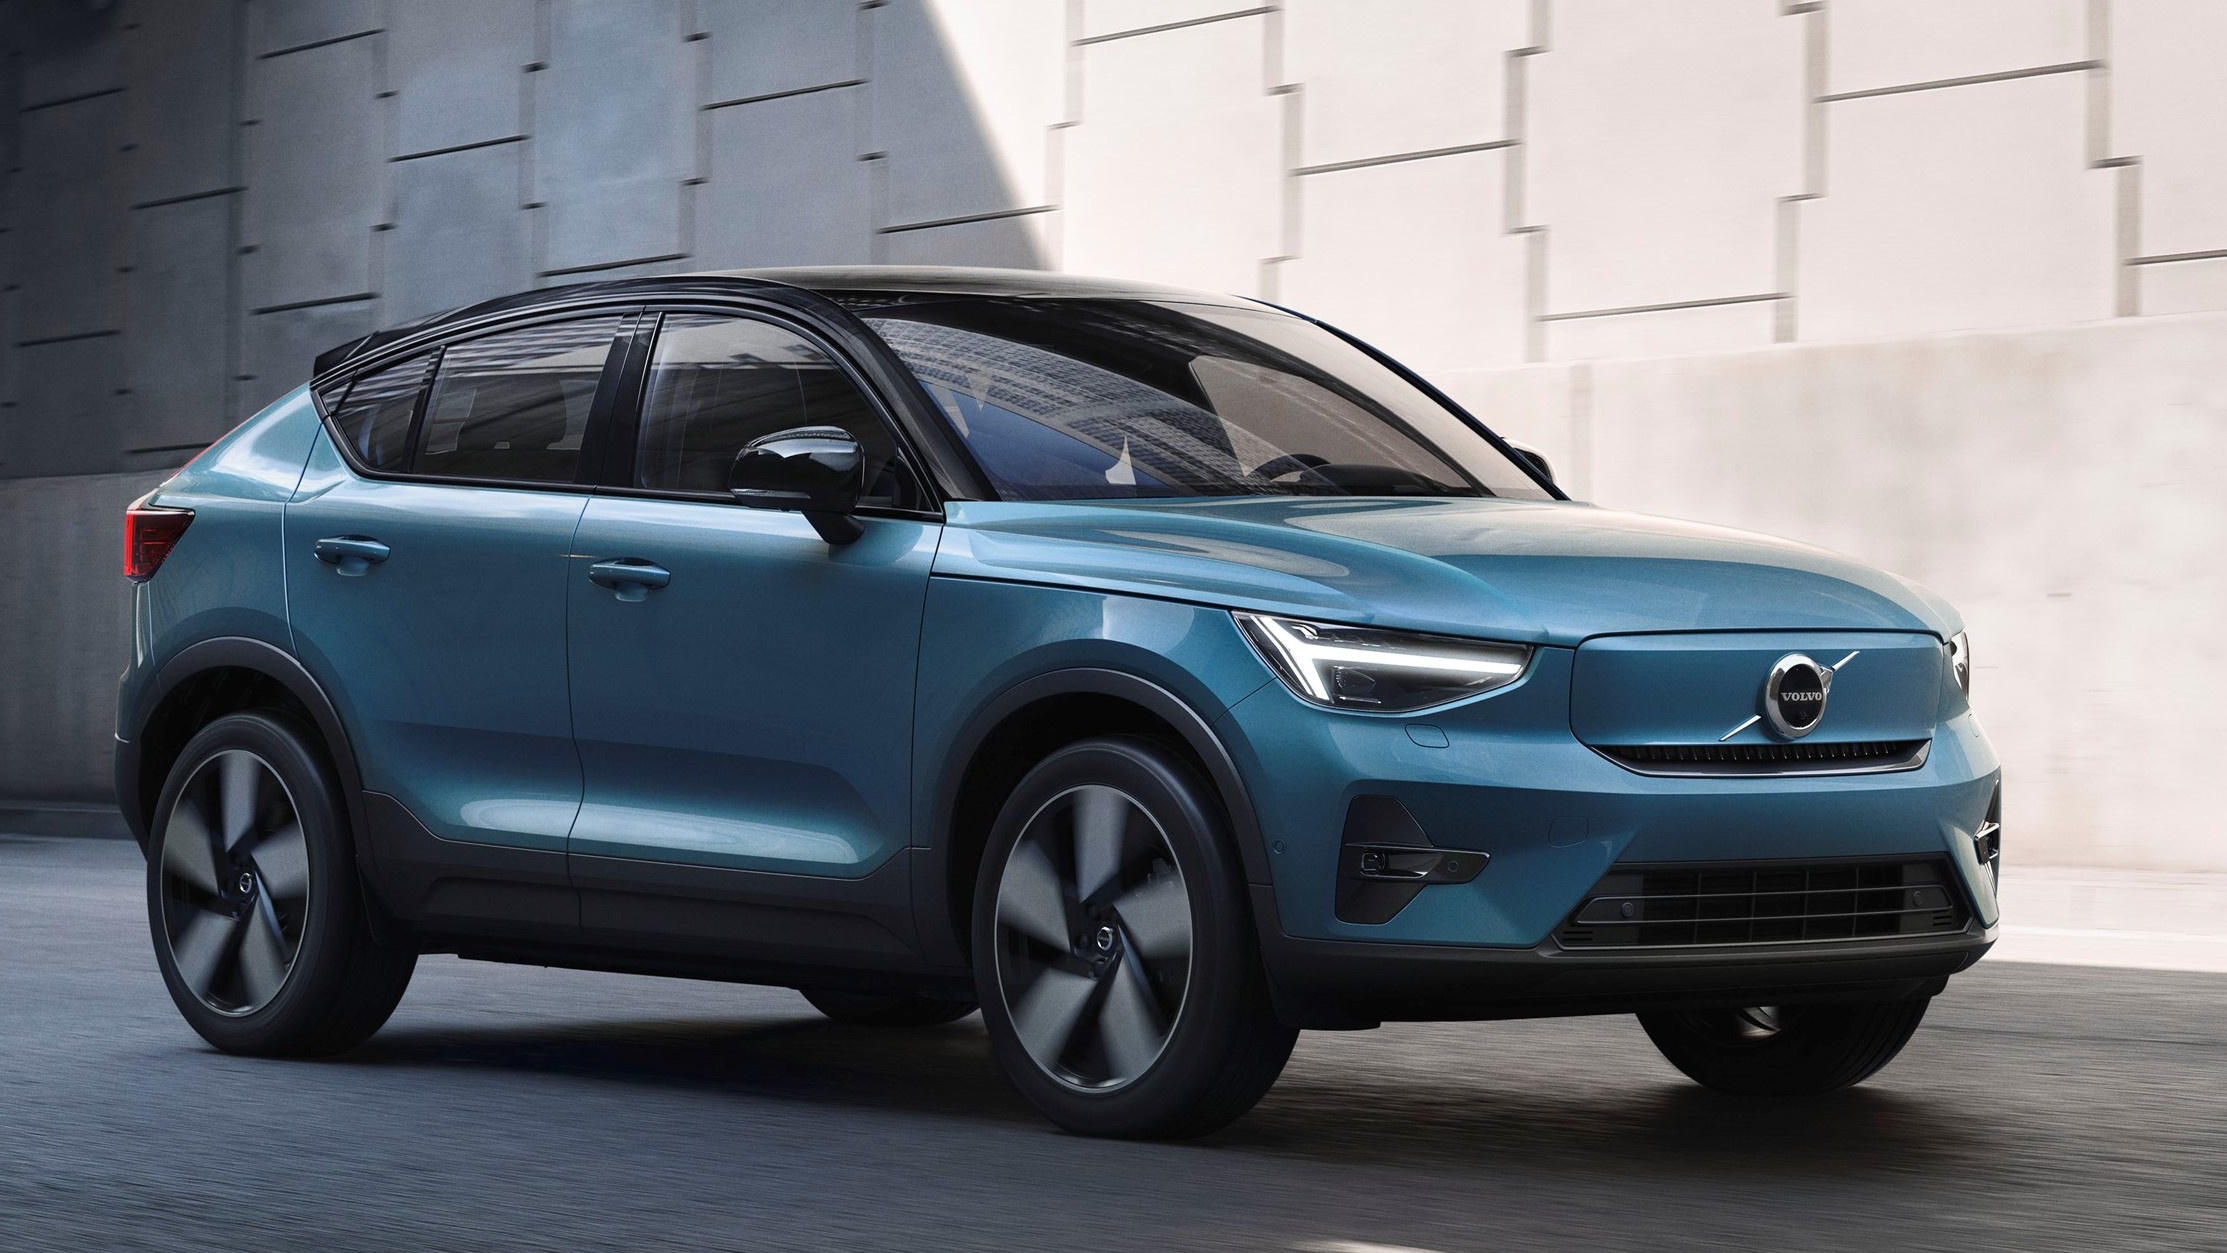 Volvo C40, Electric driving pleasure, Sustainable mobility, Cutting-edge technology, 2230x1260 HD Desktop